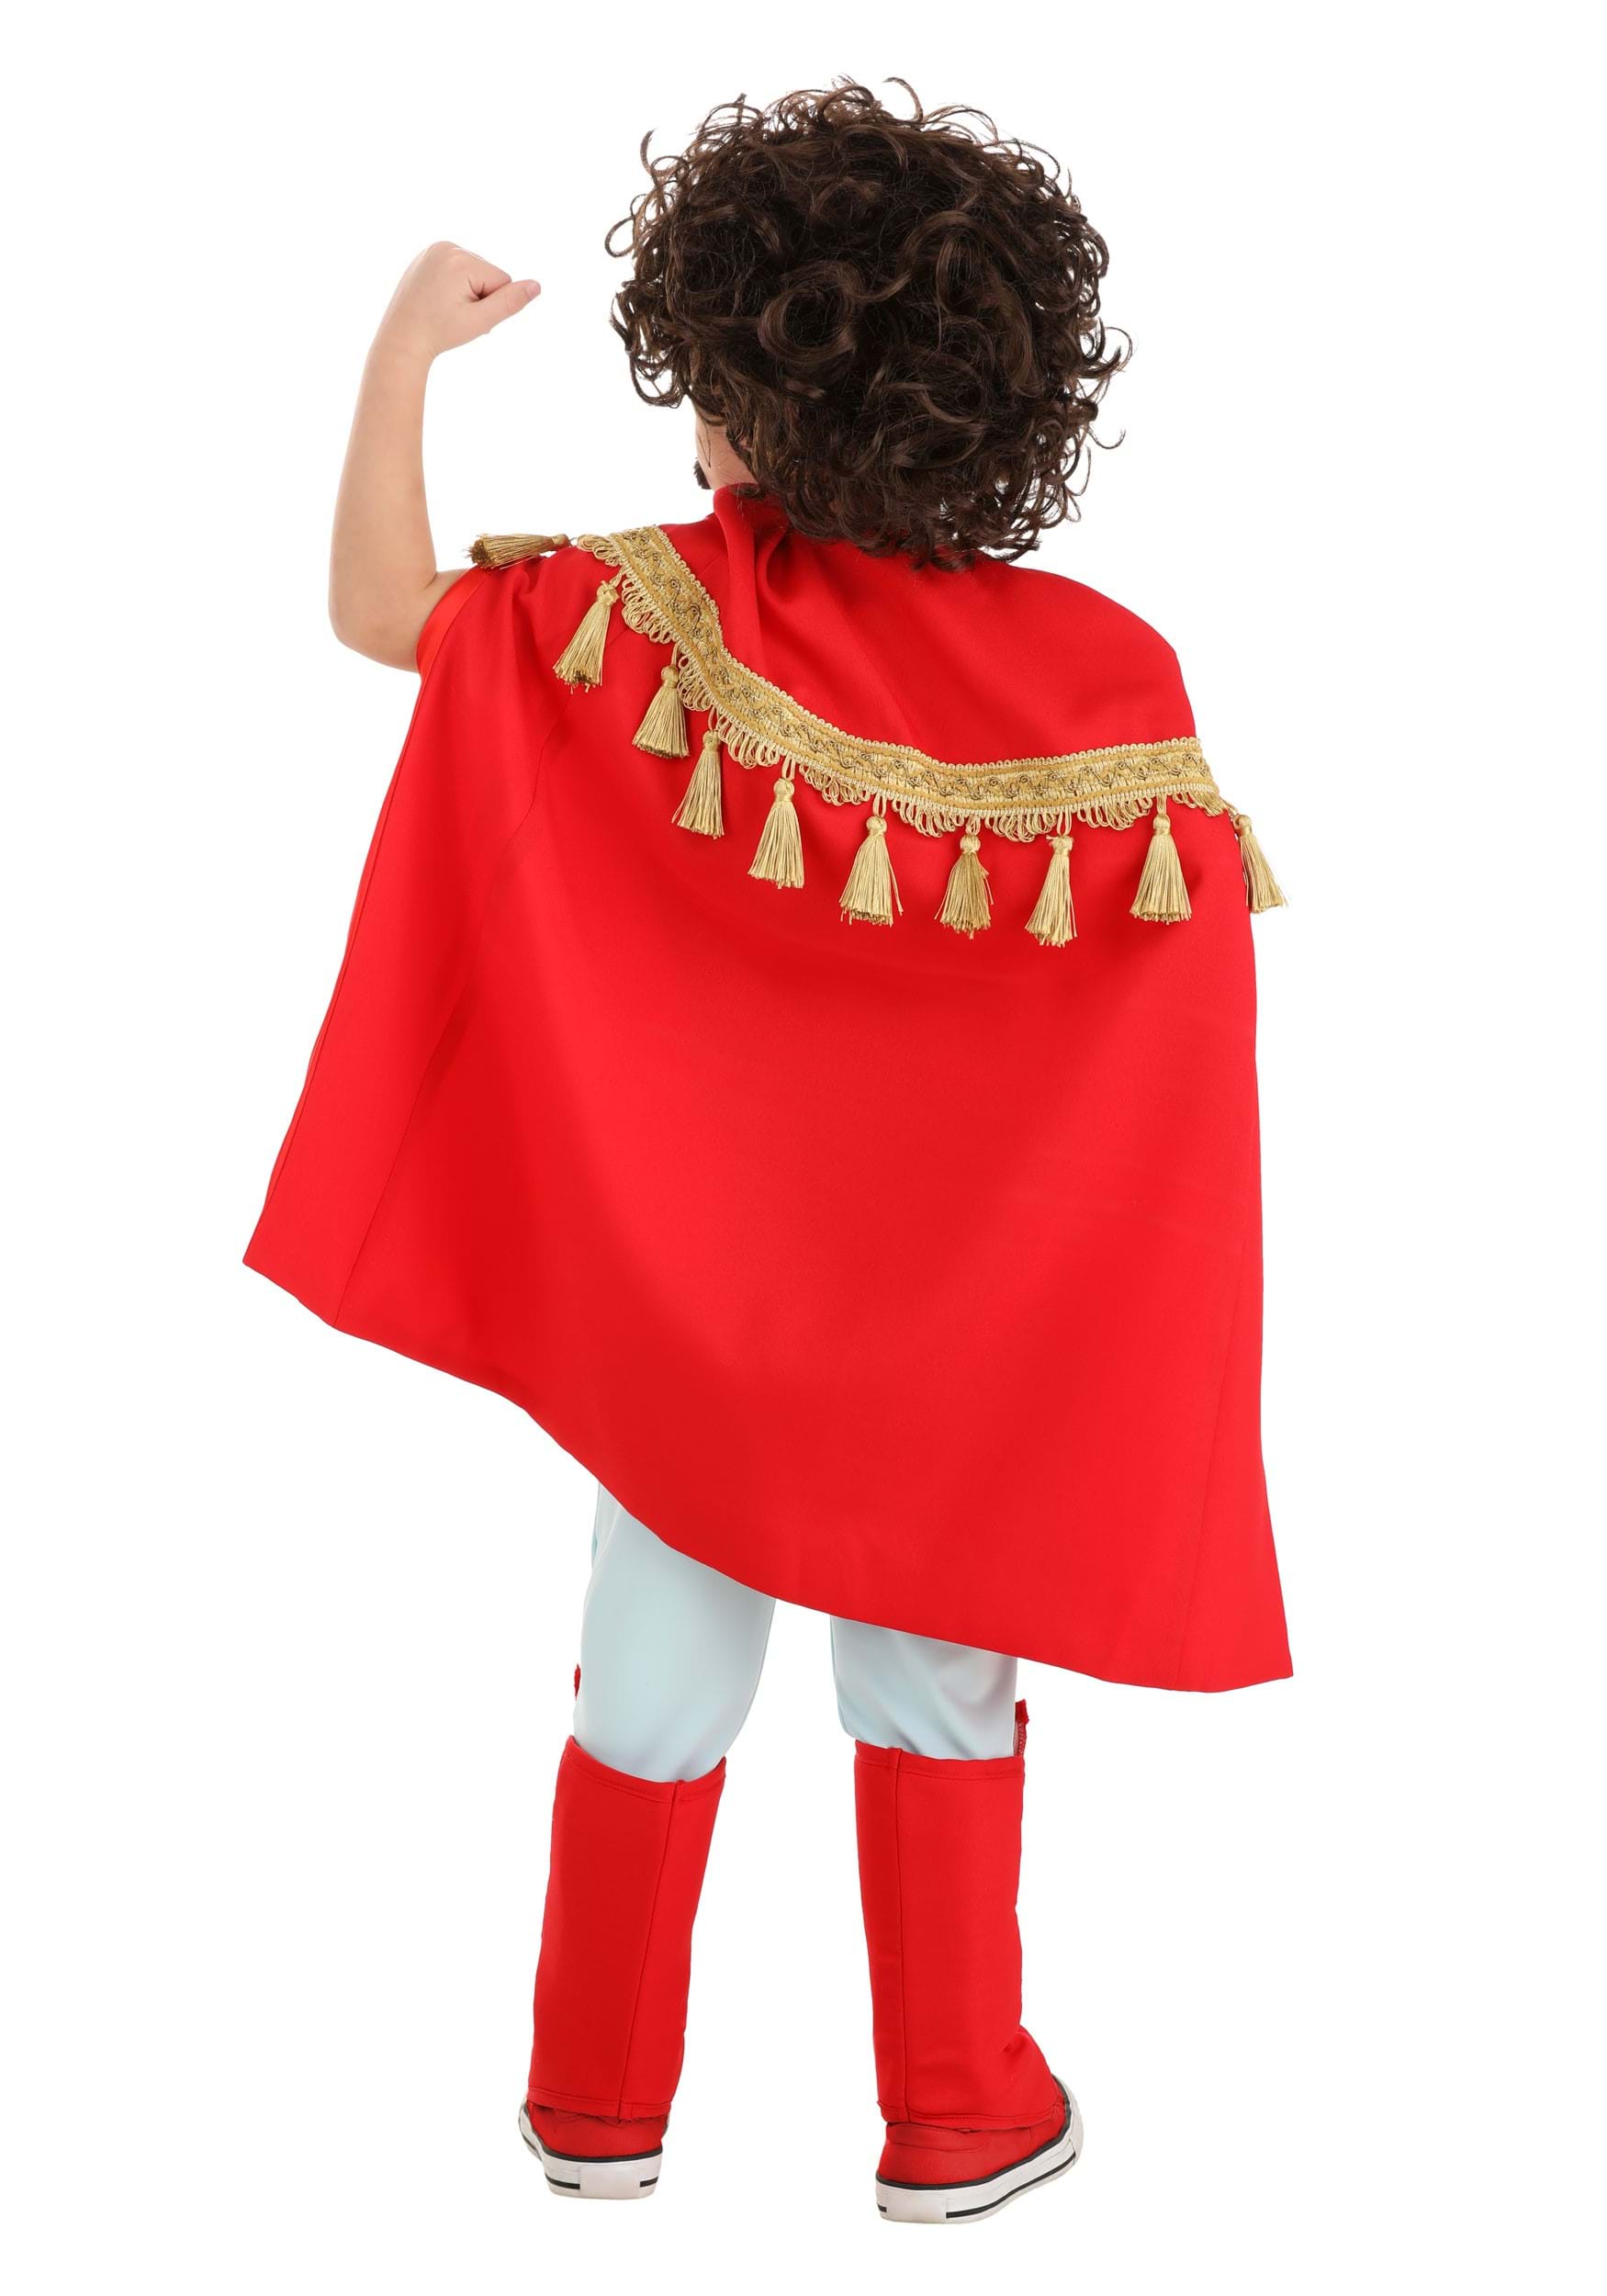 Nacho Libre Boys Costume For Toddlers